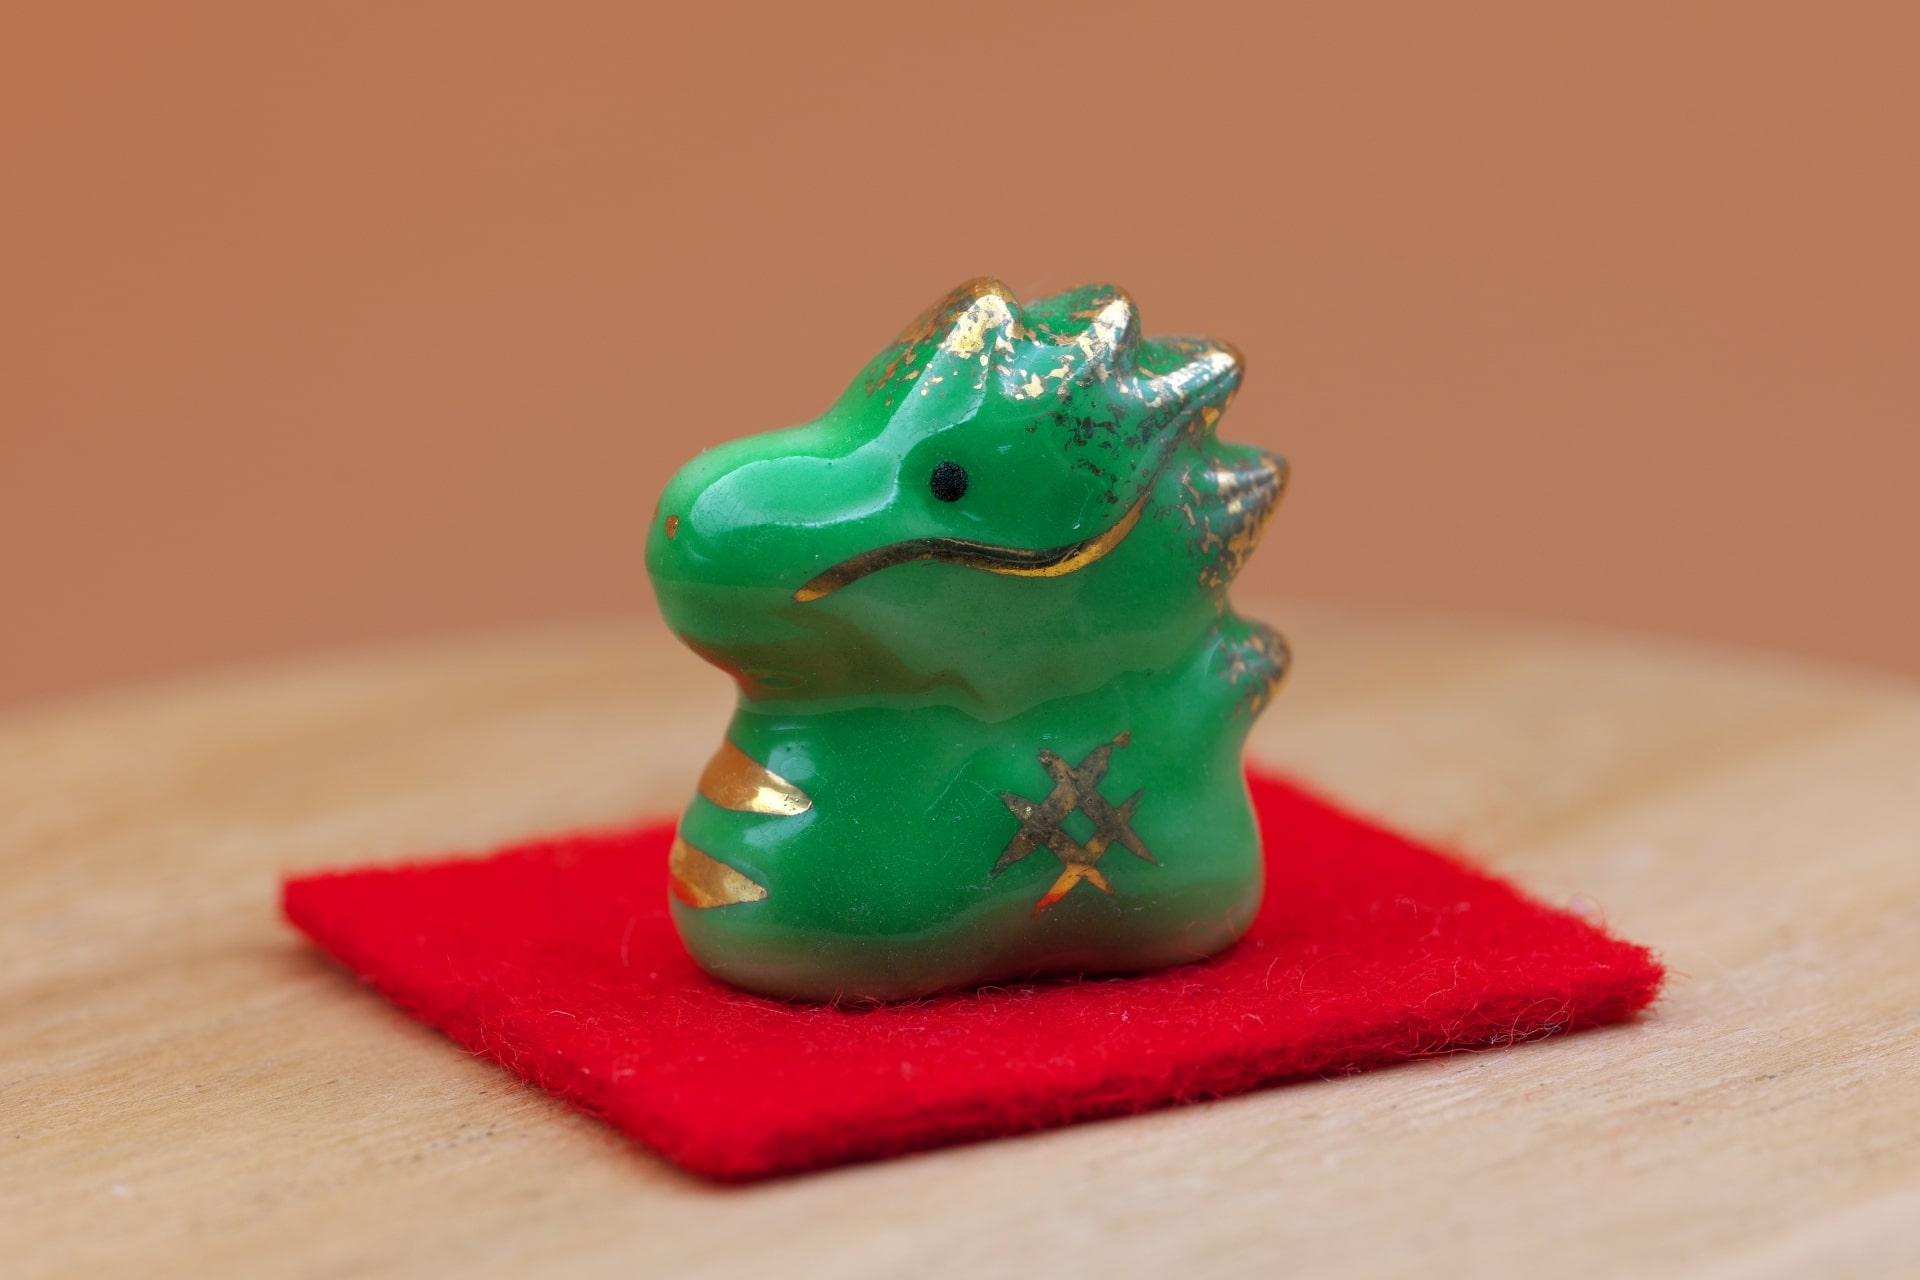 Small figurine depicting the dragon from Chinese Zodiac